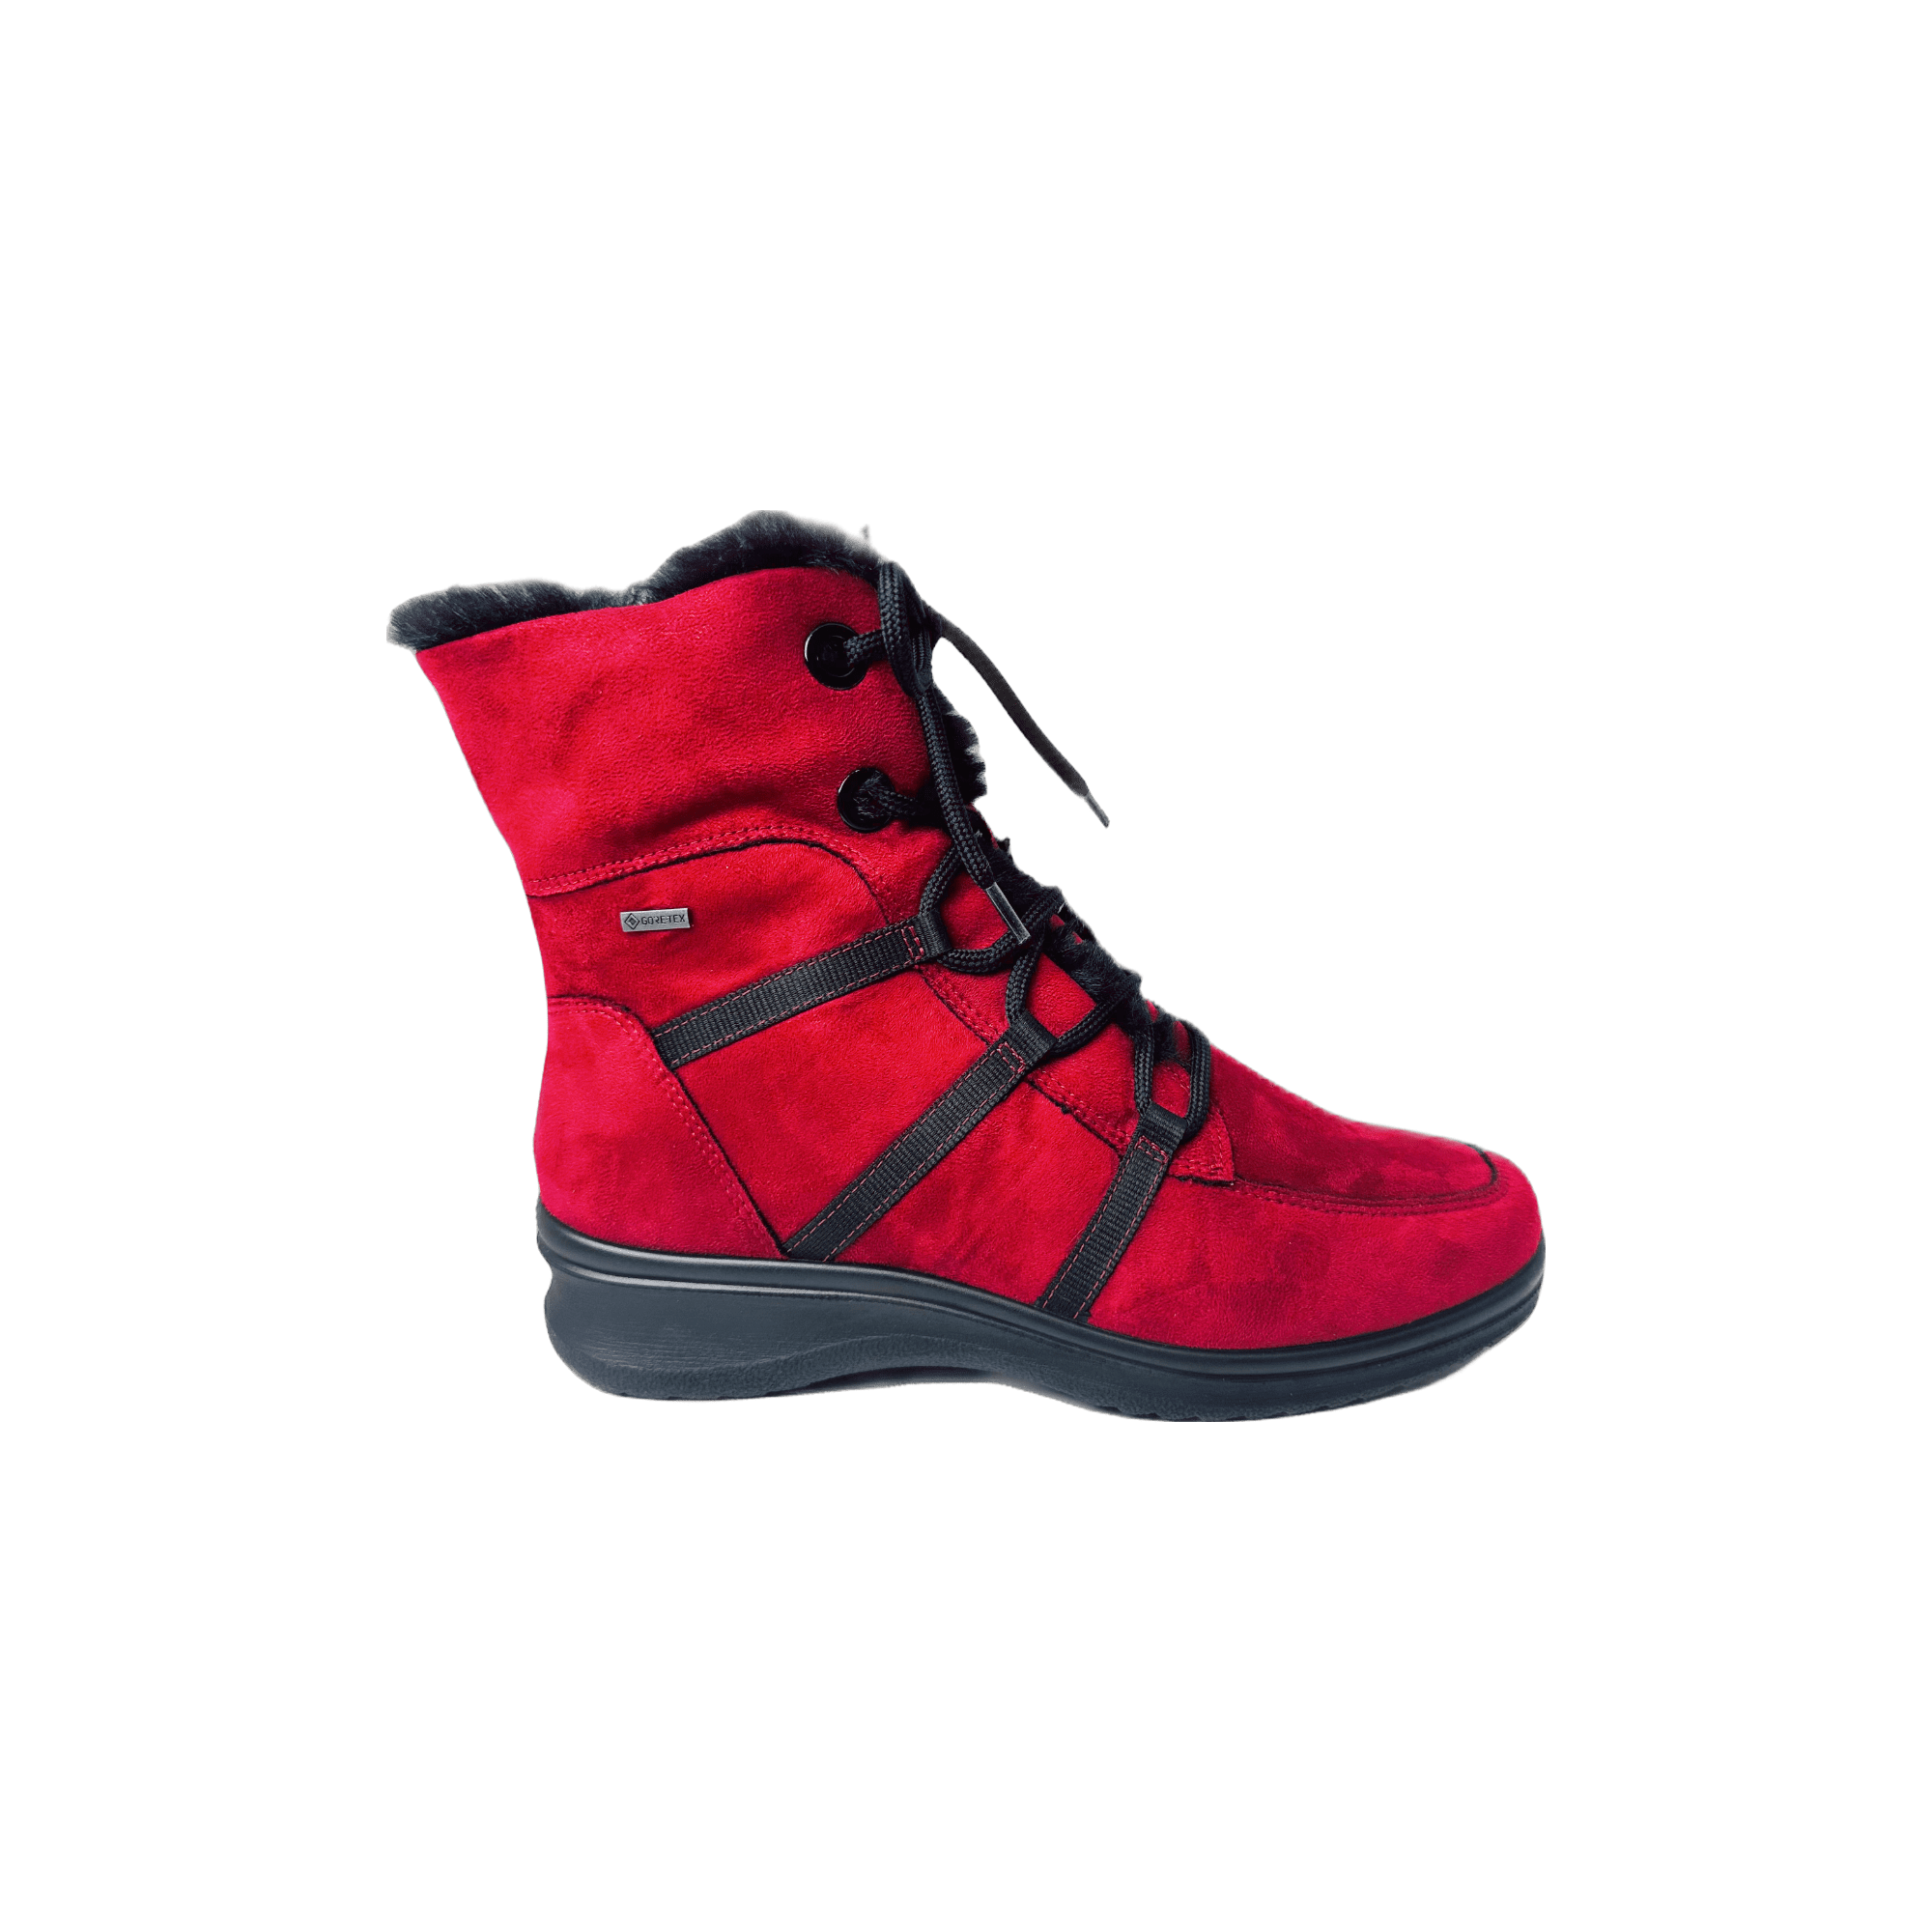 Ara Boots 6 / montreal-red / 2 inches Montreal-Red